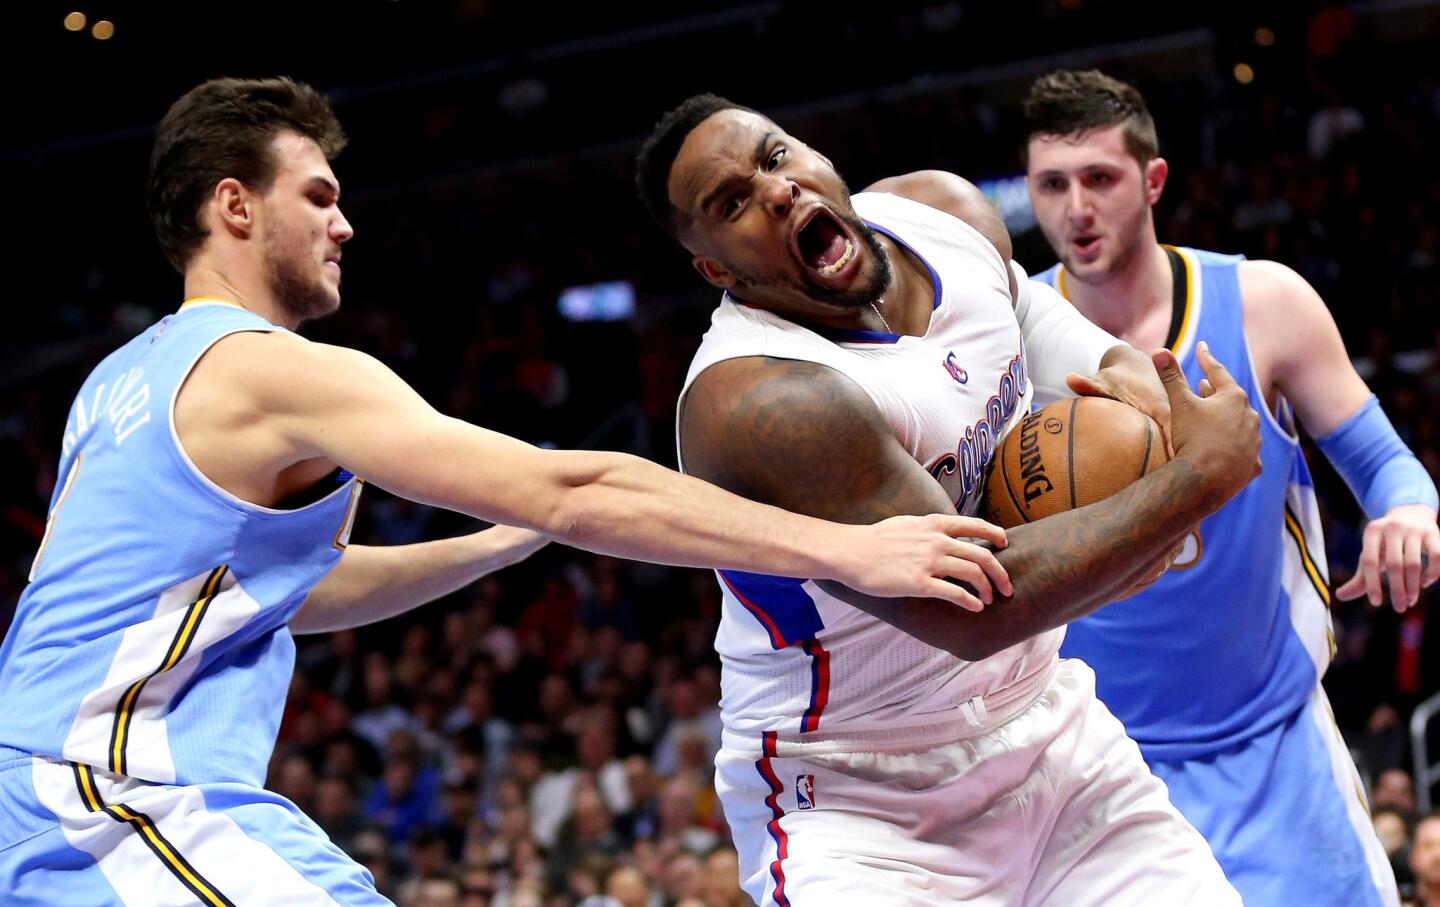 Clippers big man Glen Davis grabs a loose ball in front of Denver forward Danilo Gallinari on Monday at Staples Center. The Clippers beat the Nuggets, 102-98.